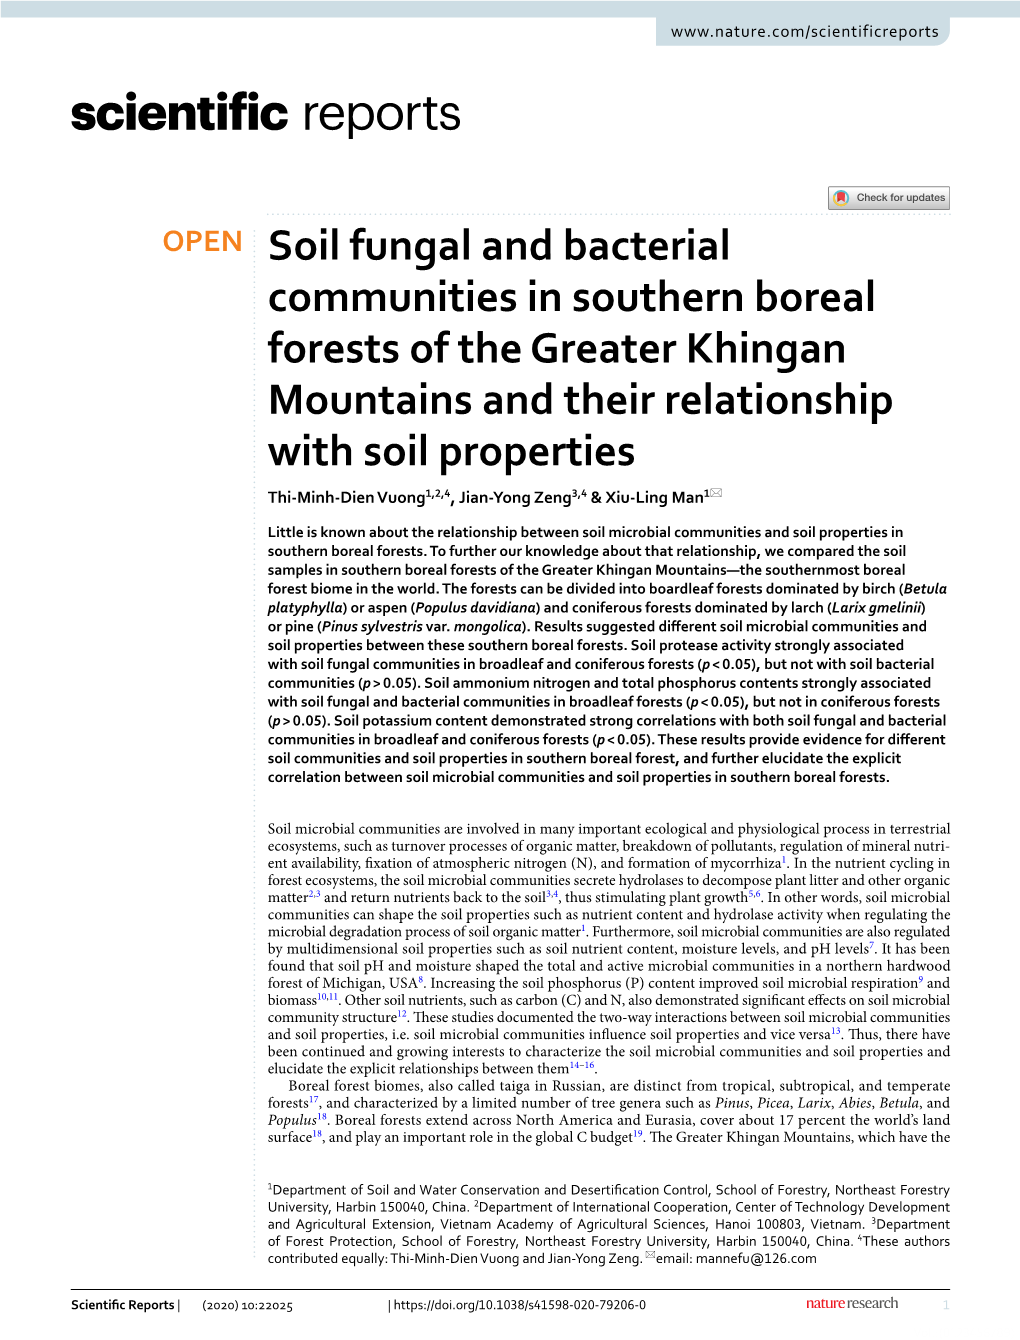 Soil Fungal and Bacterial Communities in Southern Boreal Forests of the Greater Khingan Mountains and Their Relationship with So